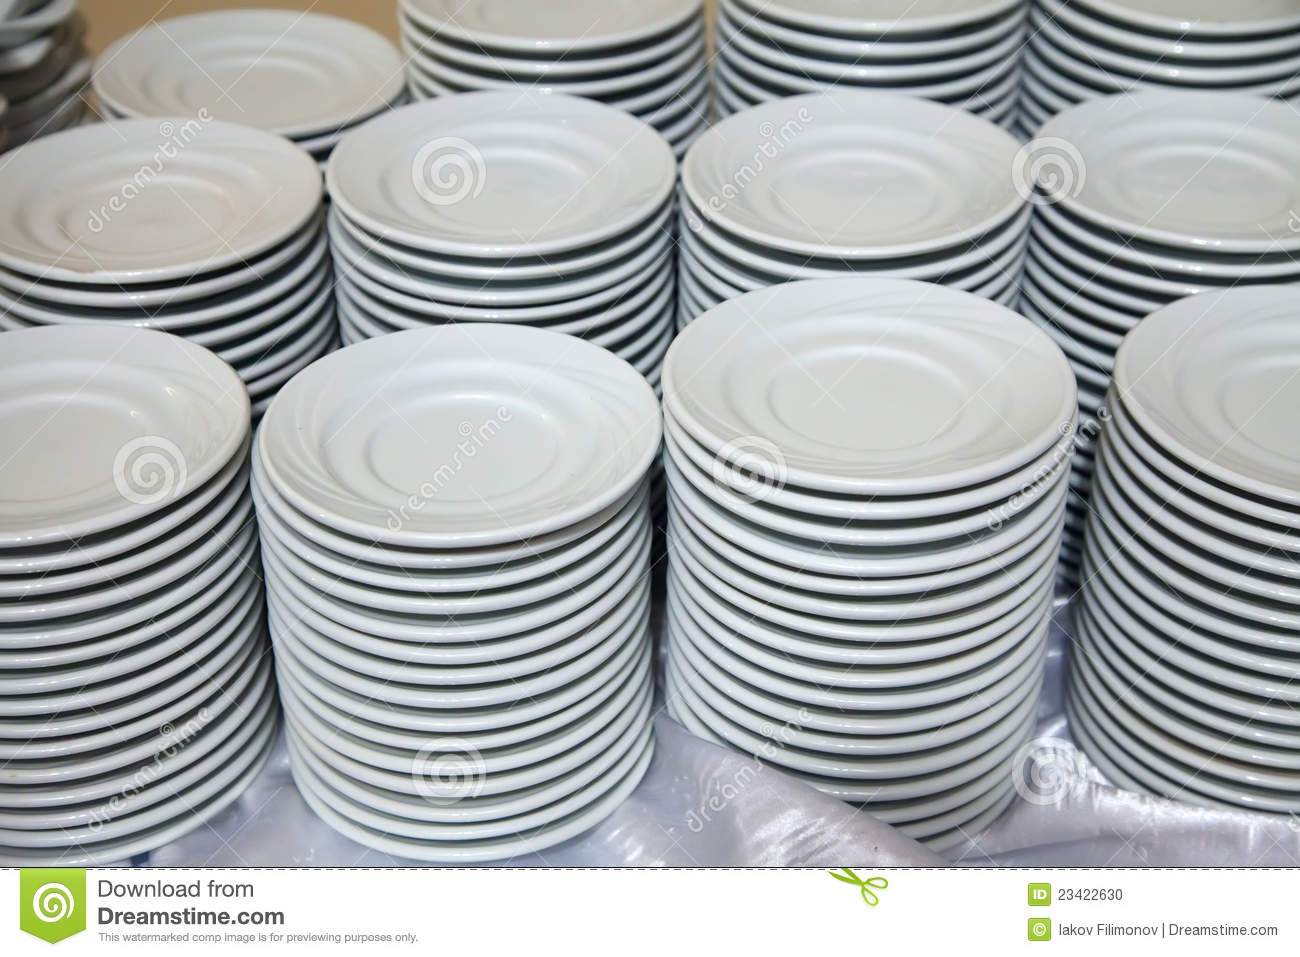 Many Plates Stacked Together Stock Photo   Image  23422630